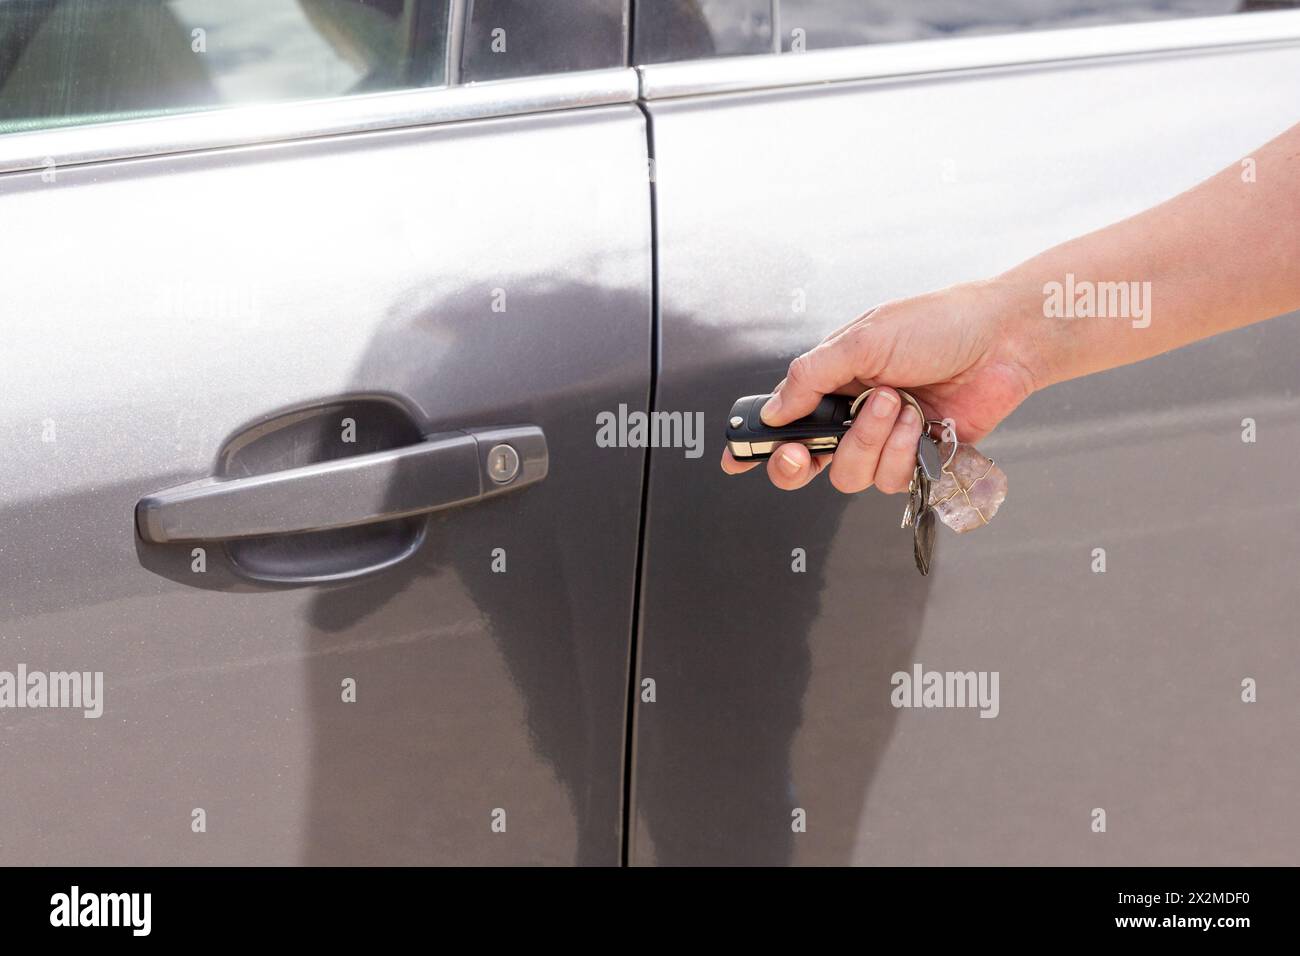 A close-up shot of a hand holding a keyless entry remote to unlock a modern grey car door Stock Photo